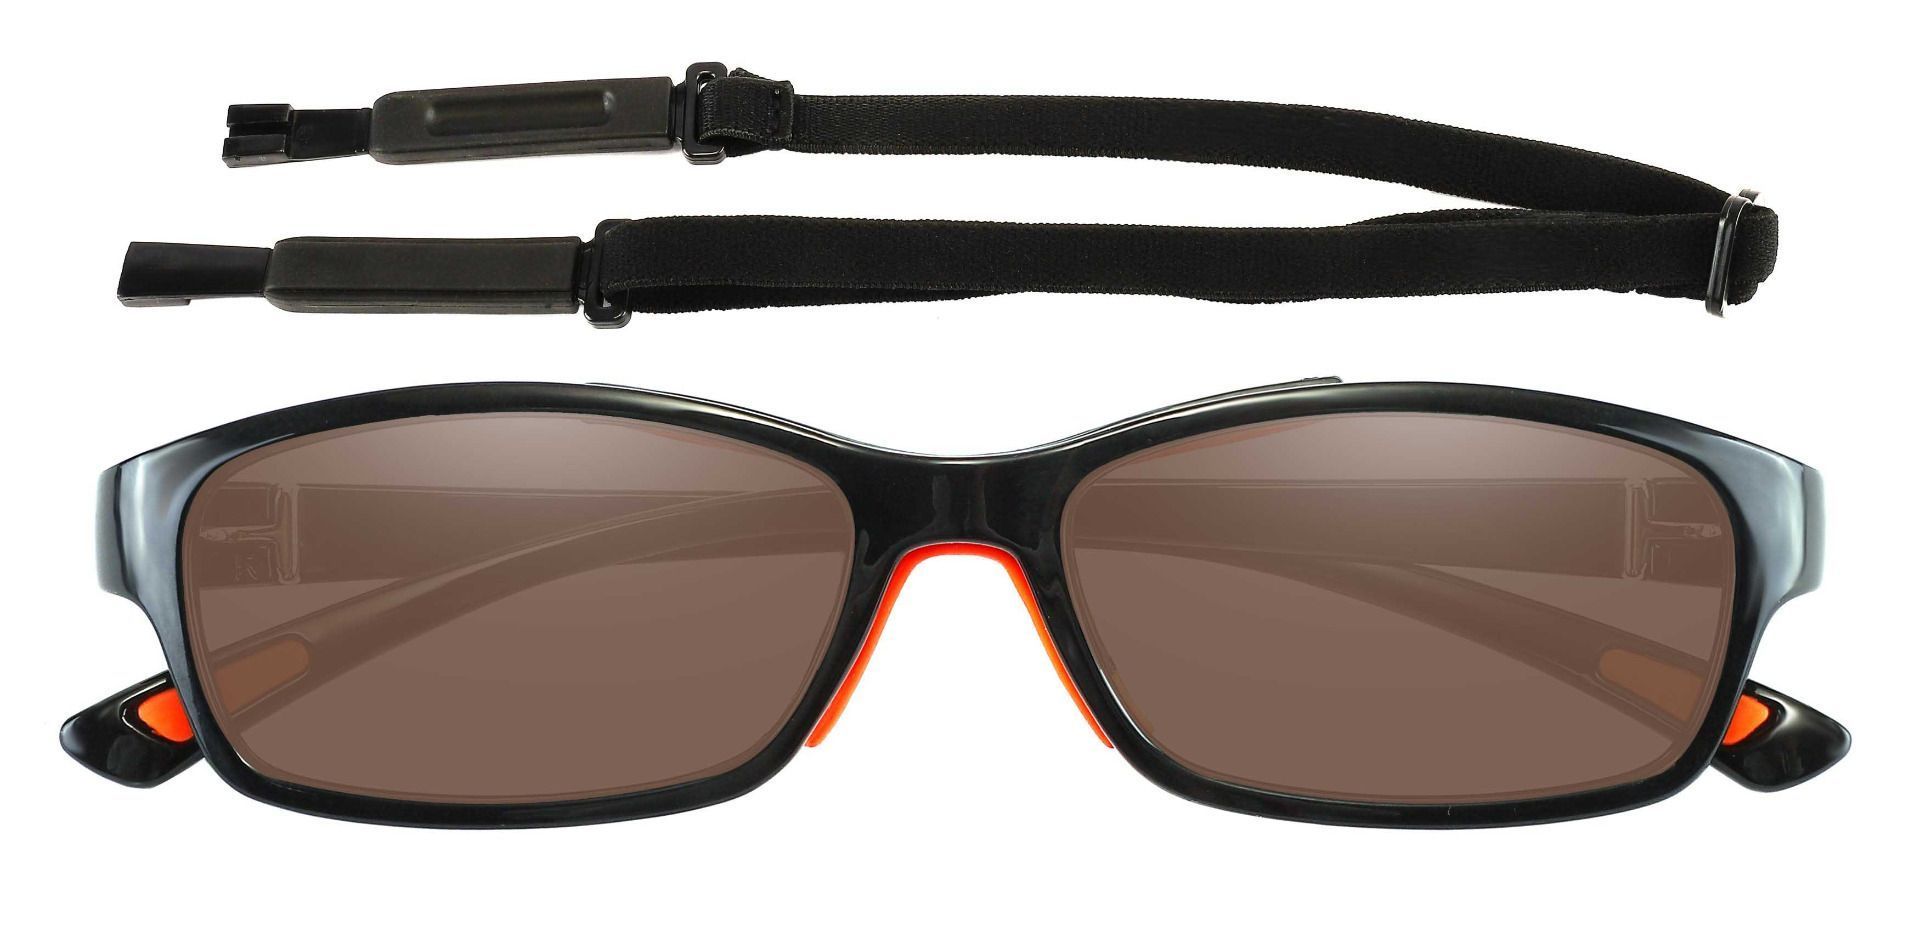 Glynn Rectangle Non-Rx Sunglasses - Black Frame With Brown Lenses